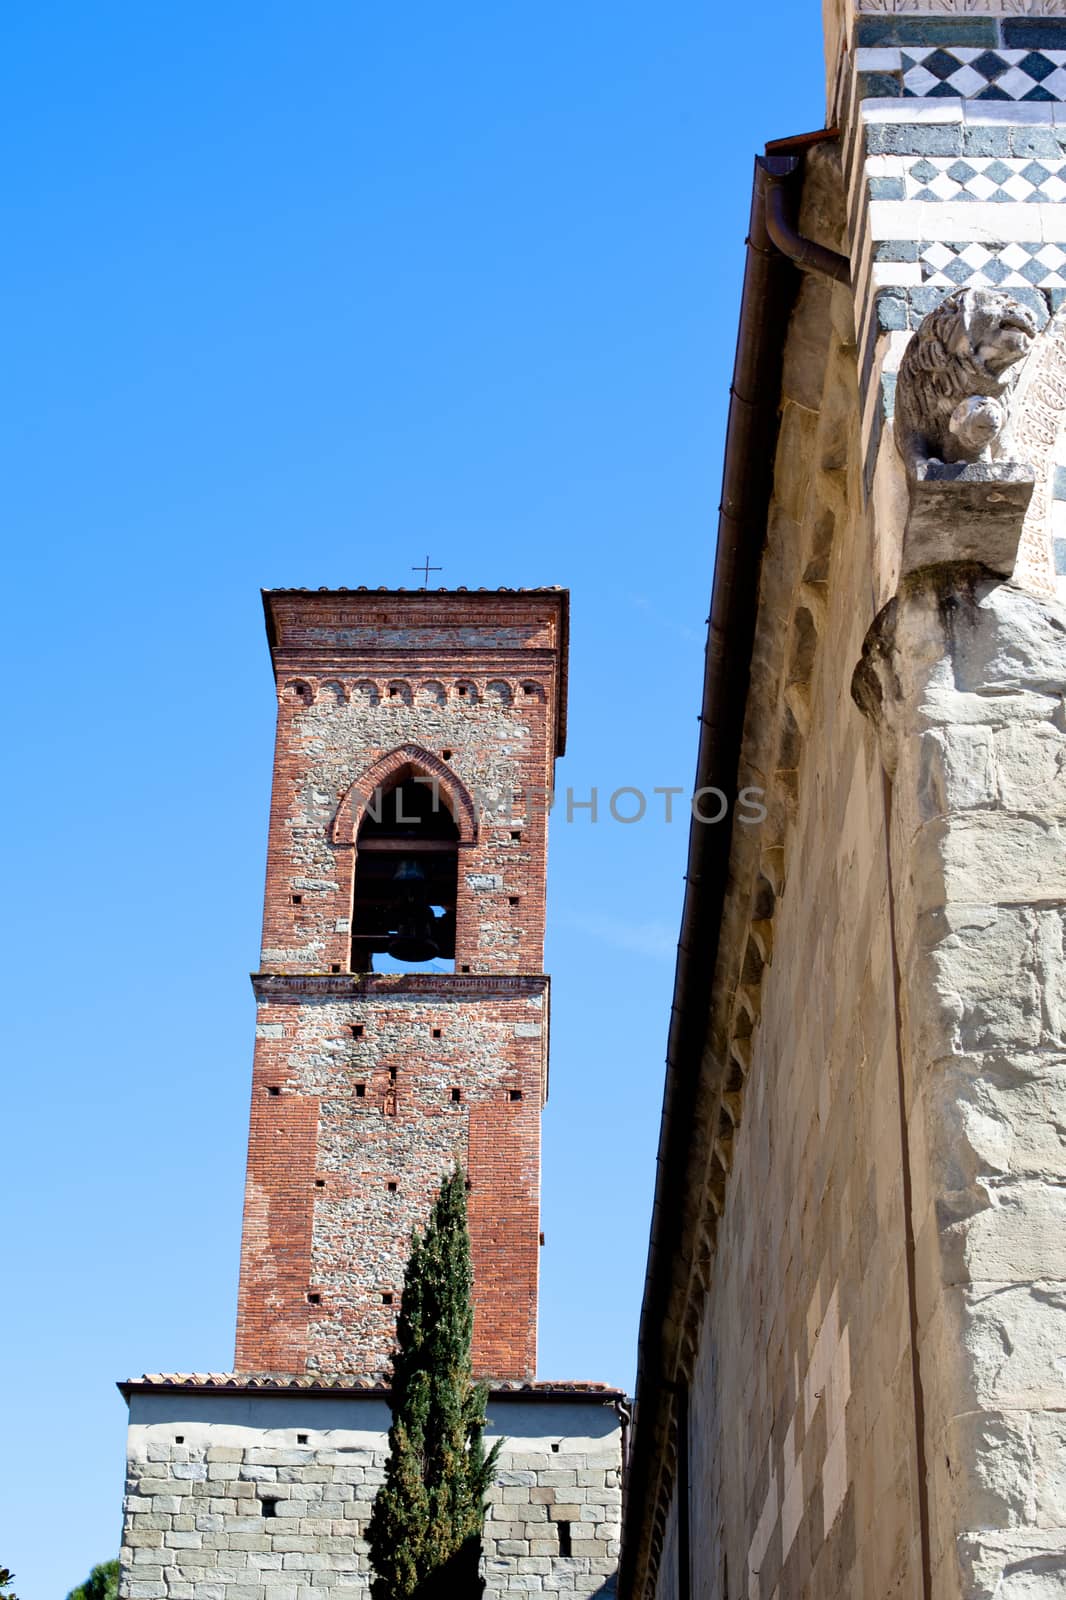 An old red medieval tower in Pistoia
